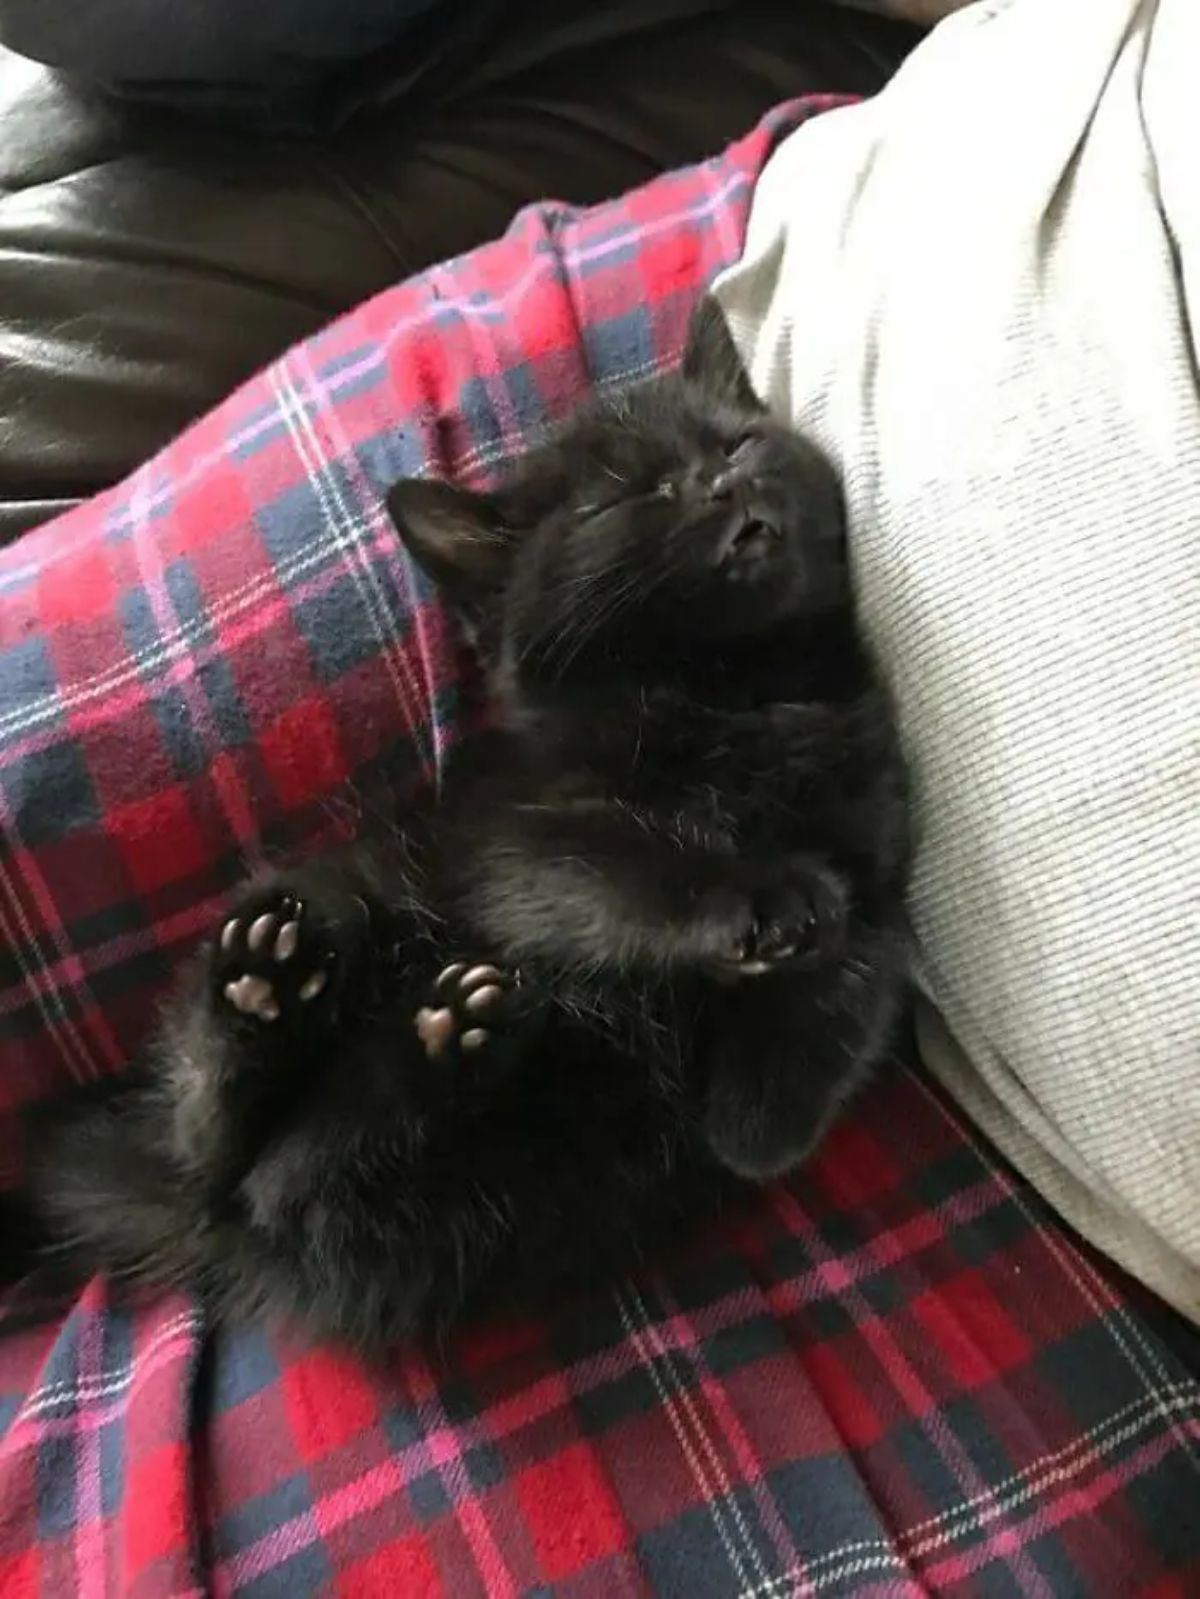 black kitten sleeping on someone's lap with the back legs raised in the air and the mouth slightly open